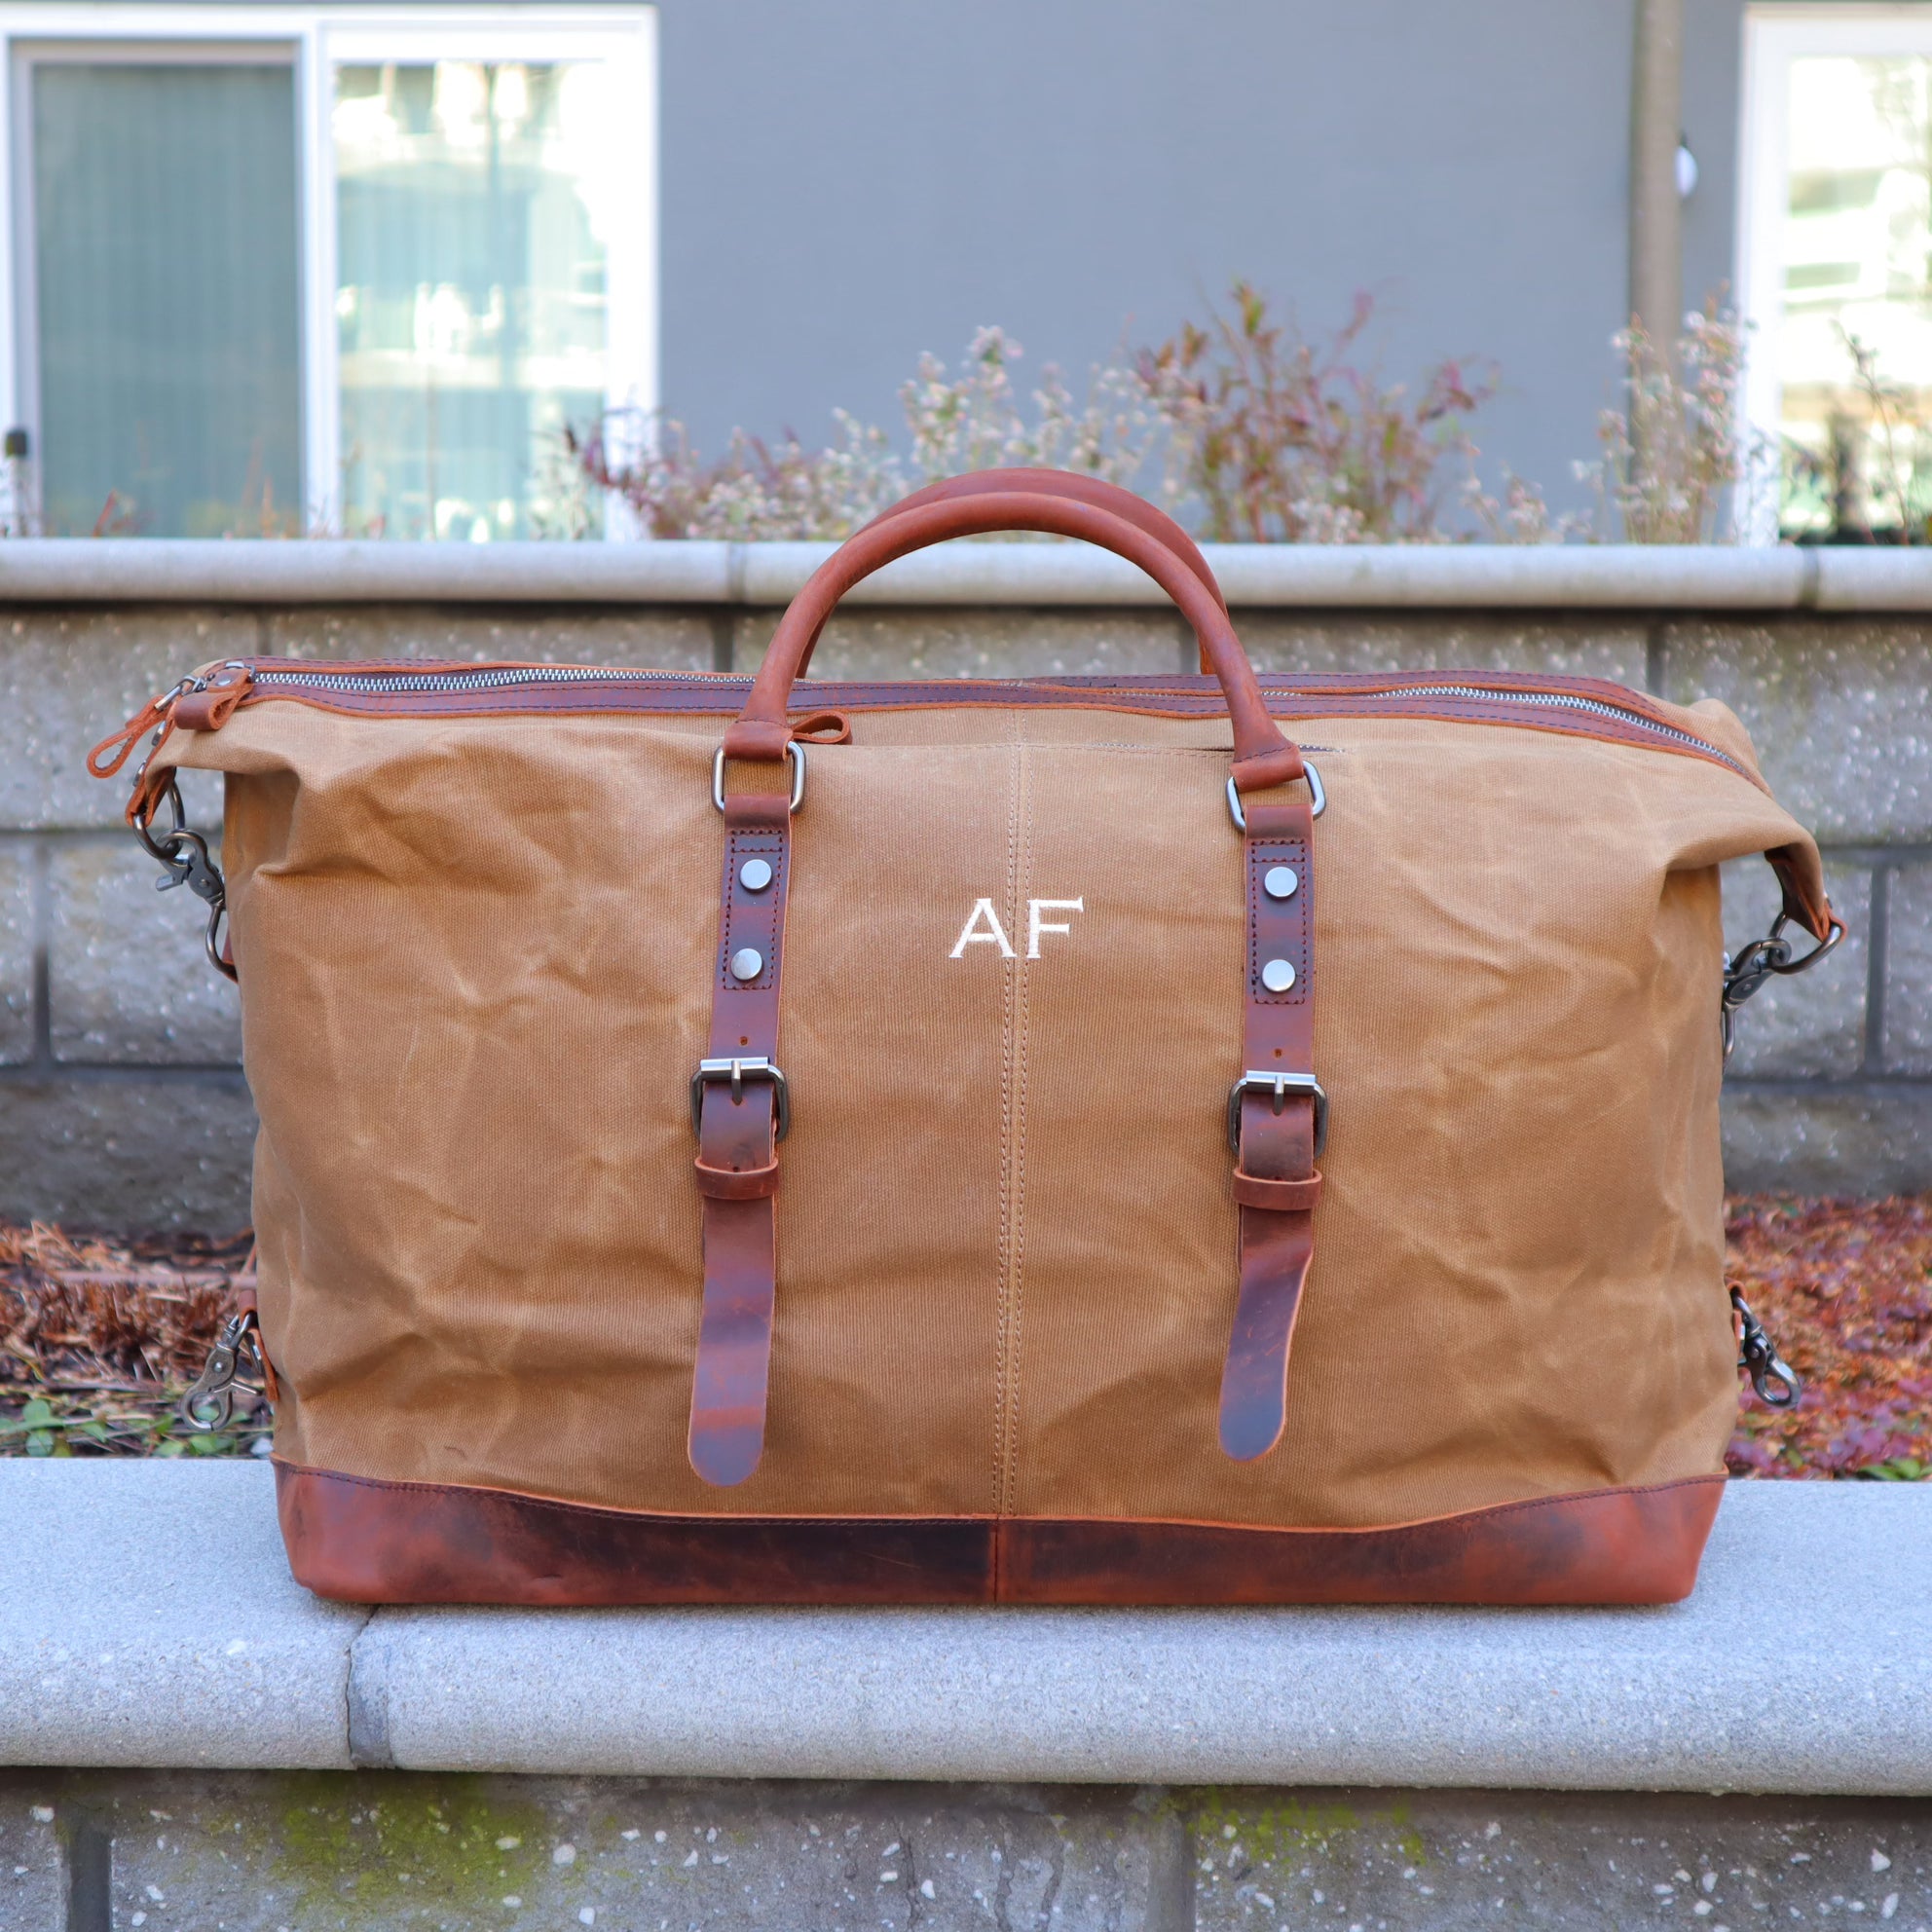 Personalized Vegan Leather Duffle Bag Monogrammed with Initials - Groovy  Guy Gifts